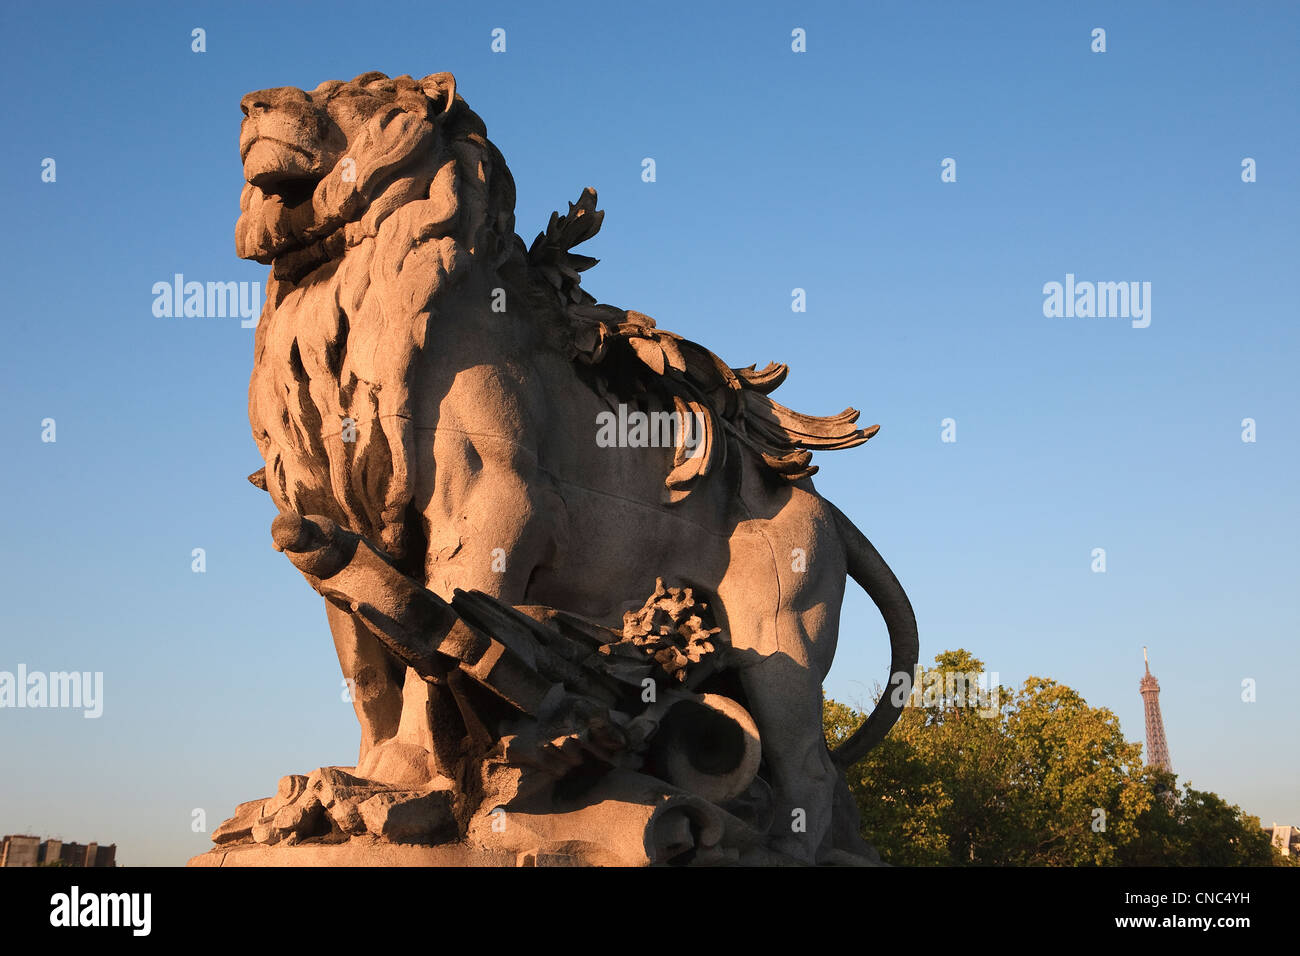 France, Paris, sculpture of a lion on the Pont Alexandre III by the sculptor Dalou and Eiffel Tower in the background Stock Photo